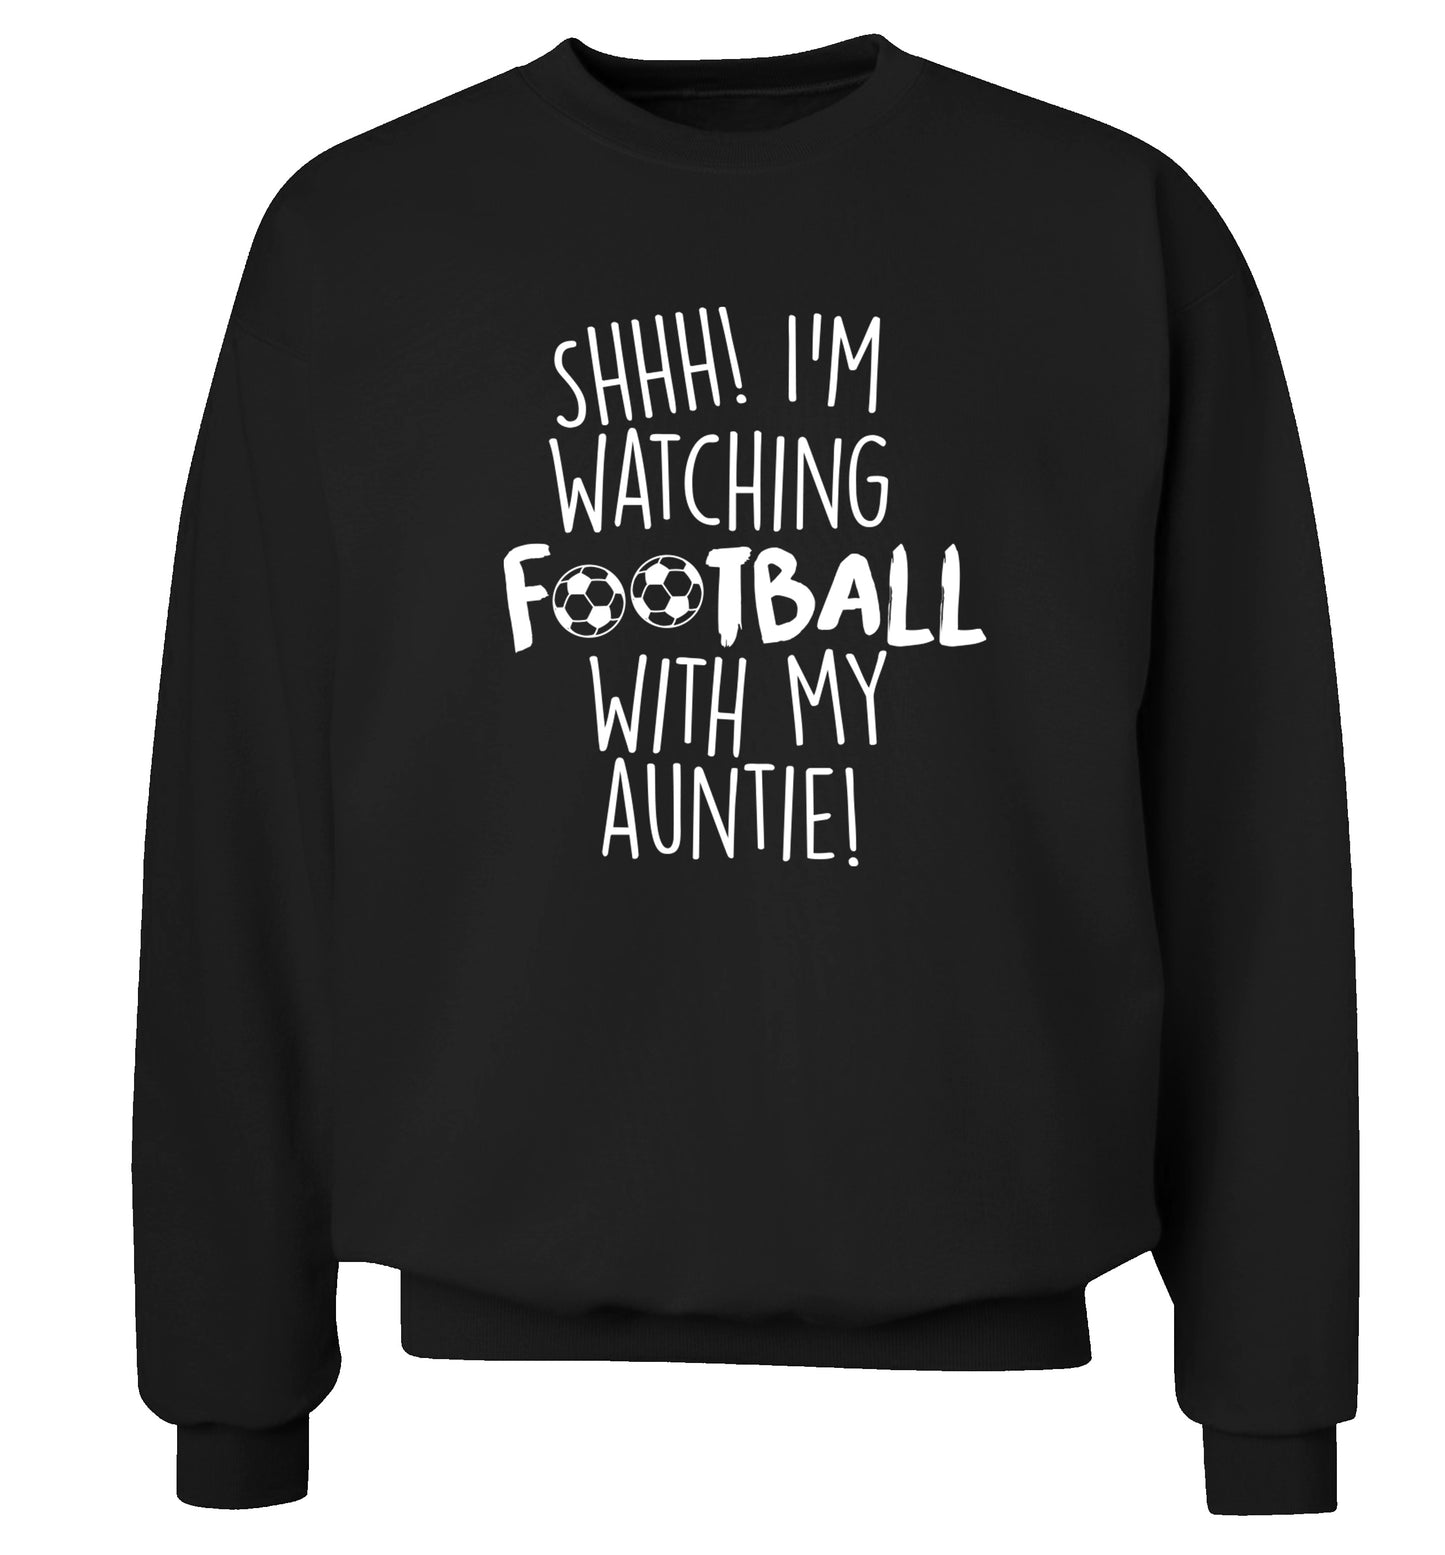 Shhh I'm watching football with my auntie Adult's unisexblack Sweater 2XL